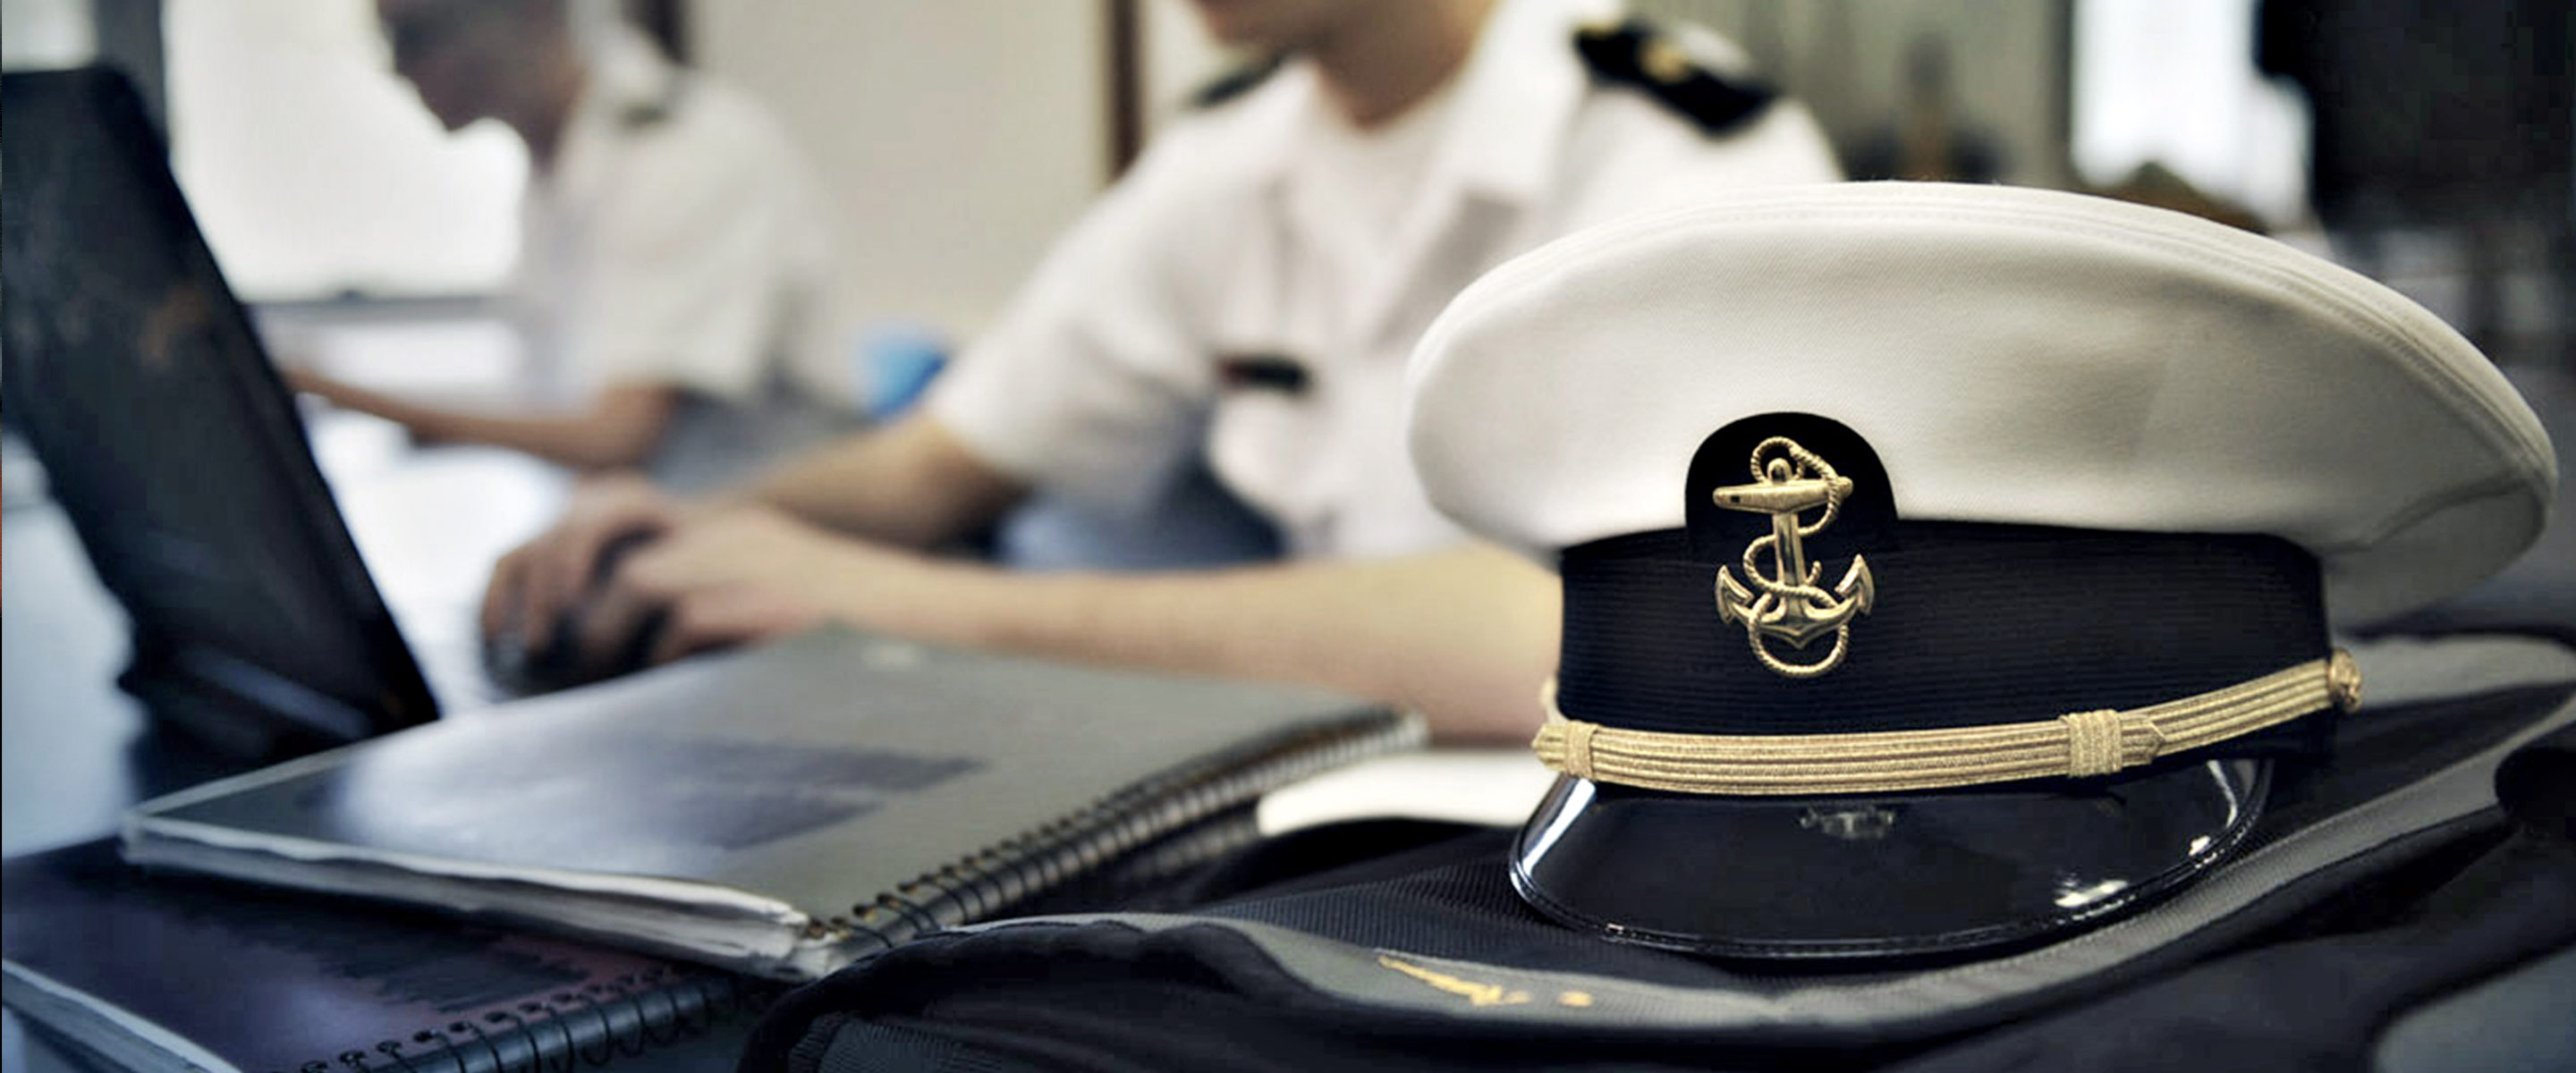 Navy officer 's cover sitting on a table while Sailors are in class